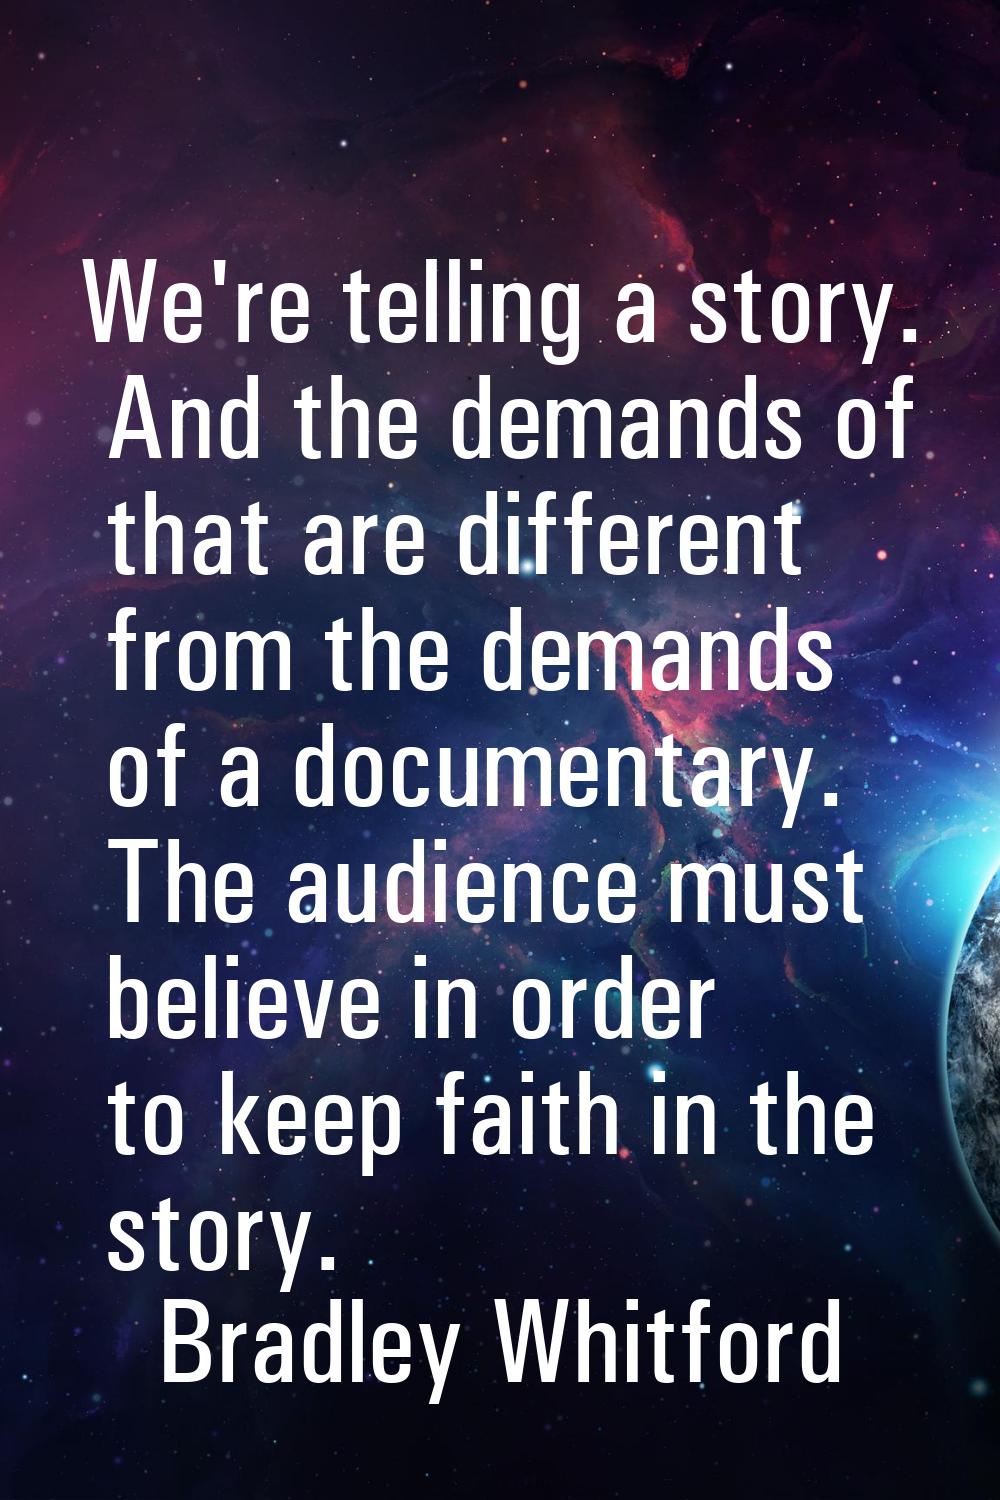 We're telling a story. And the demands of that are different from the demands of a documentary. The